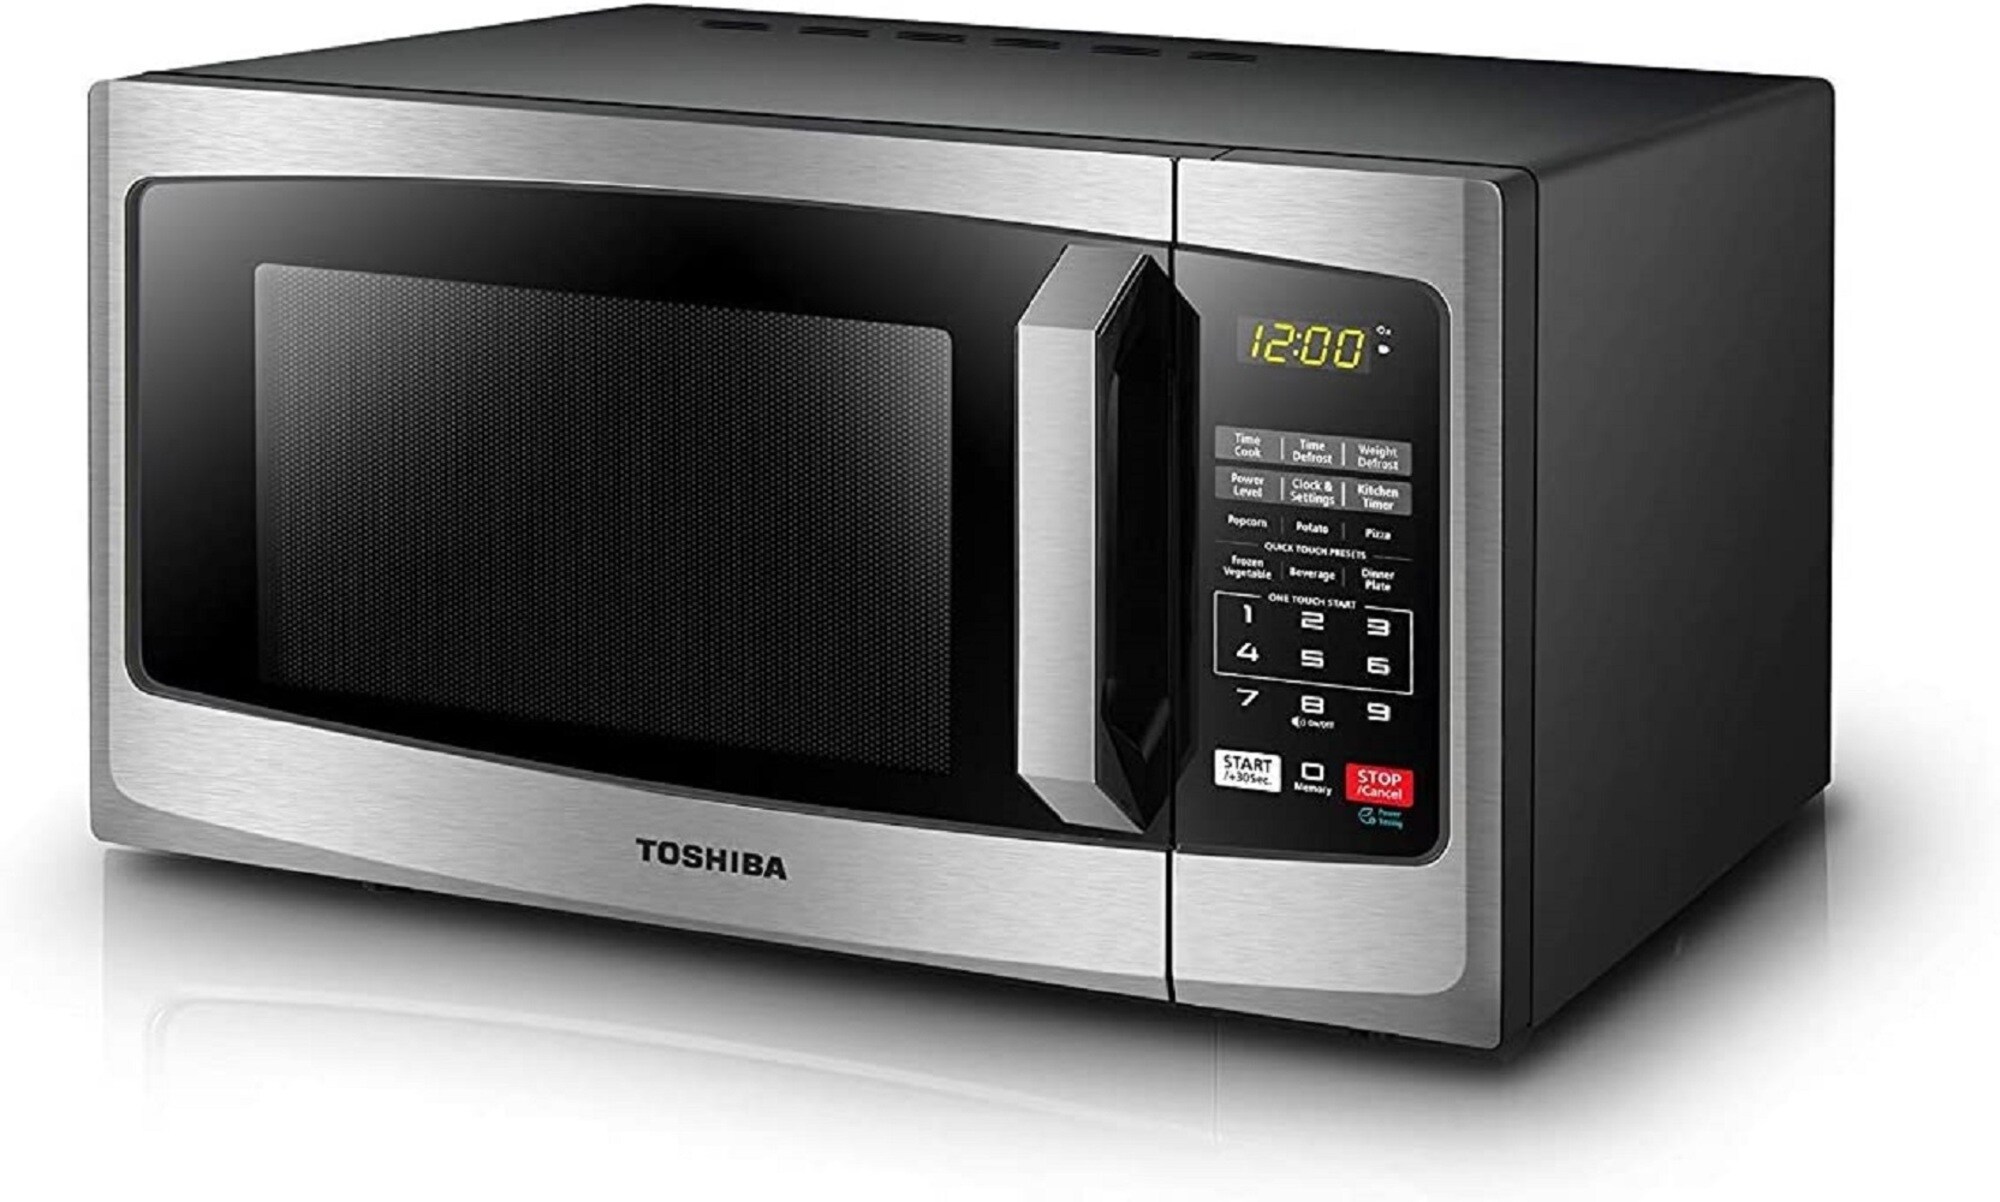 GE 0.9 Cu. Ft. Capacity Smart Countertop Microwave Oven with Scan